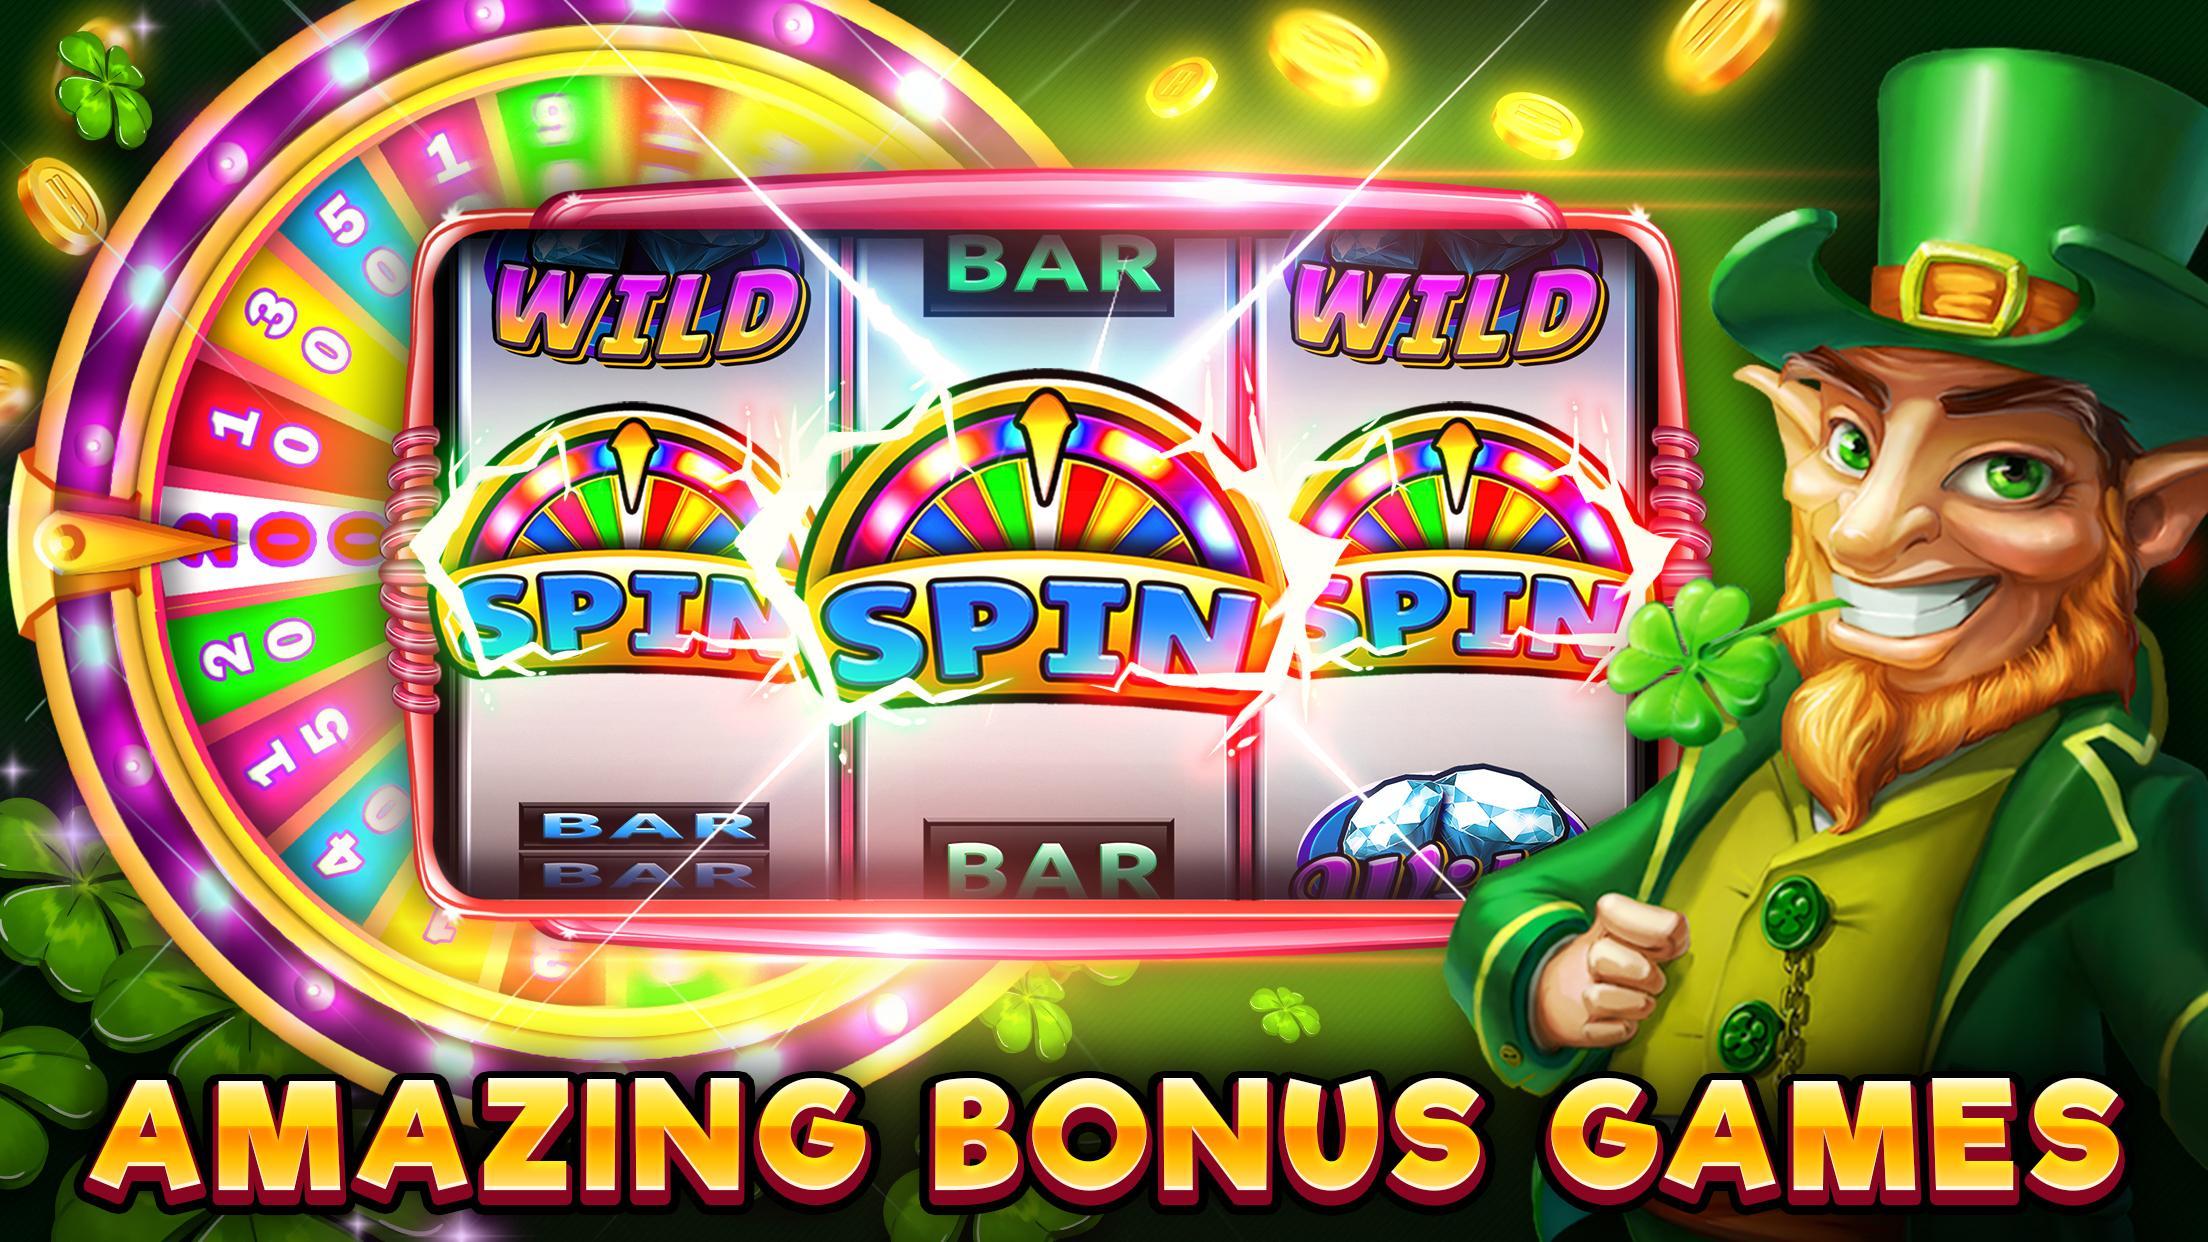 huuuge casino best slots to play